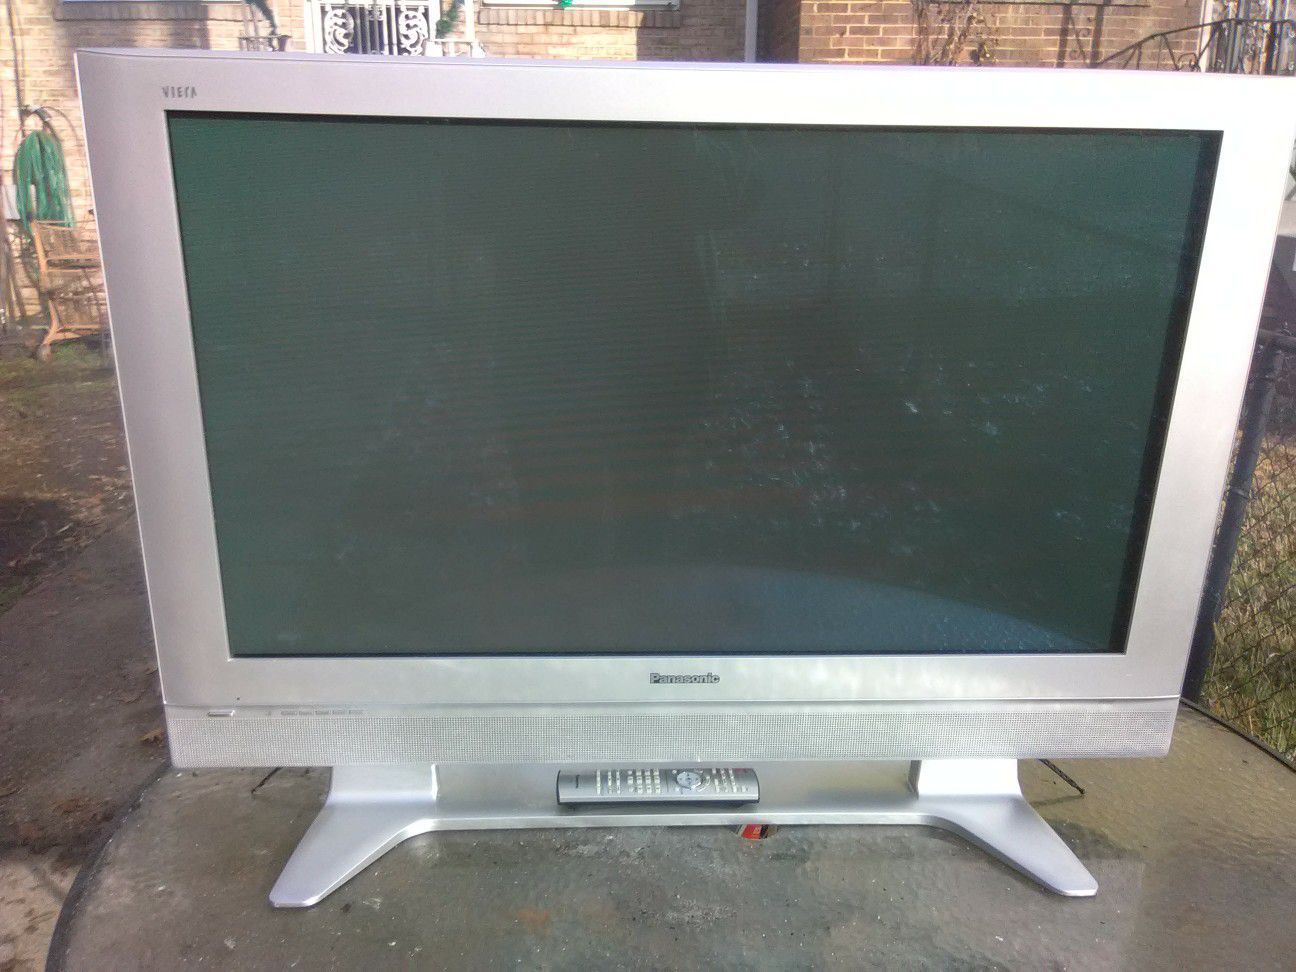 Panasonic 42 inch TV with remote control and HDMI port